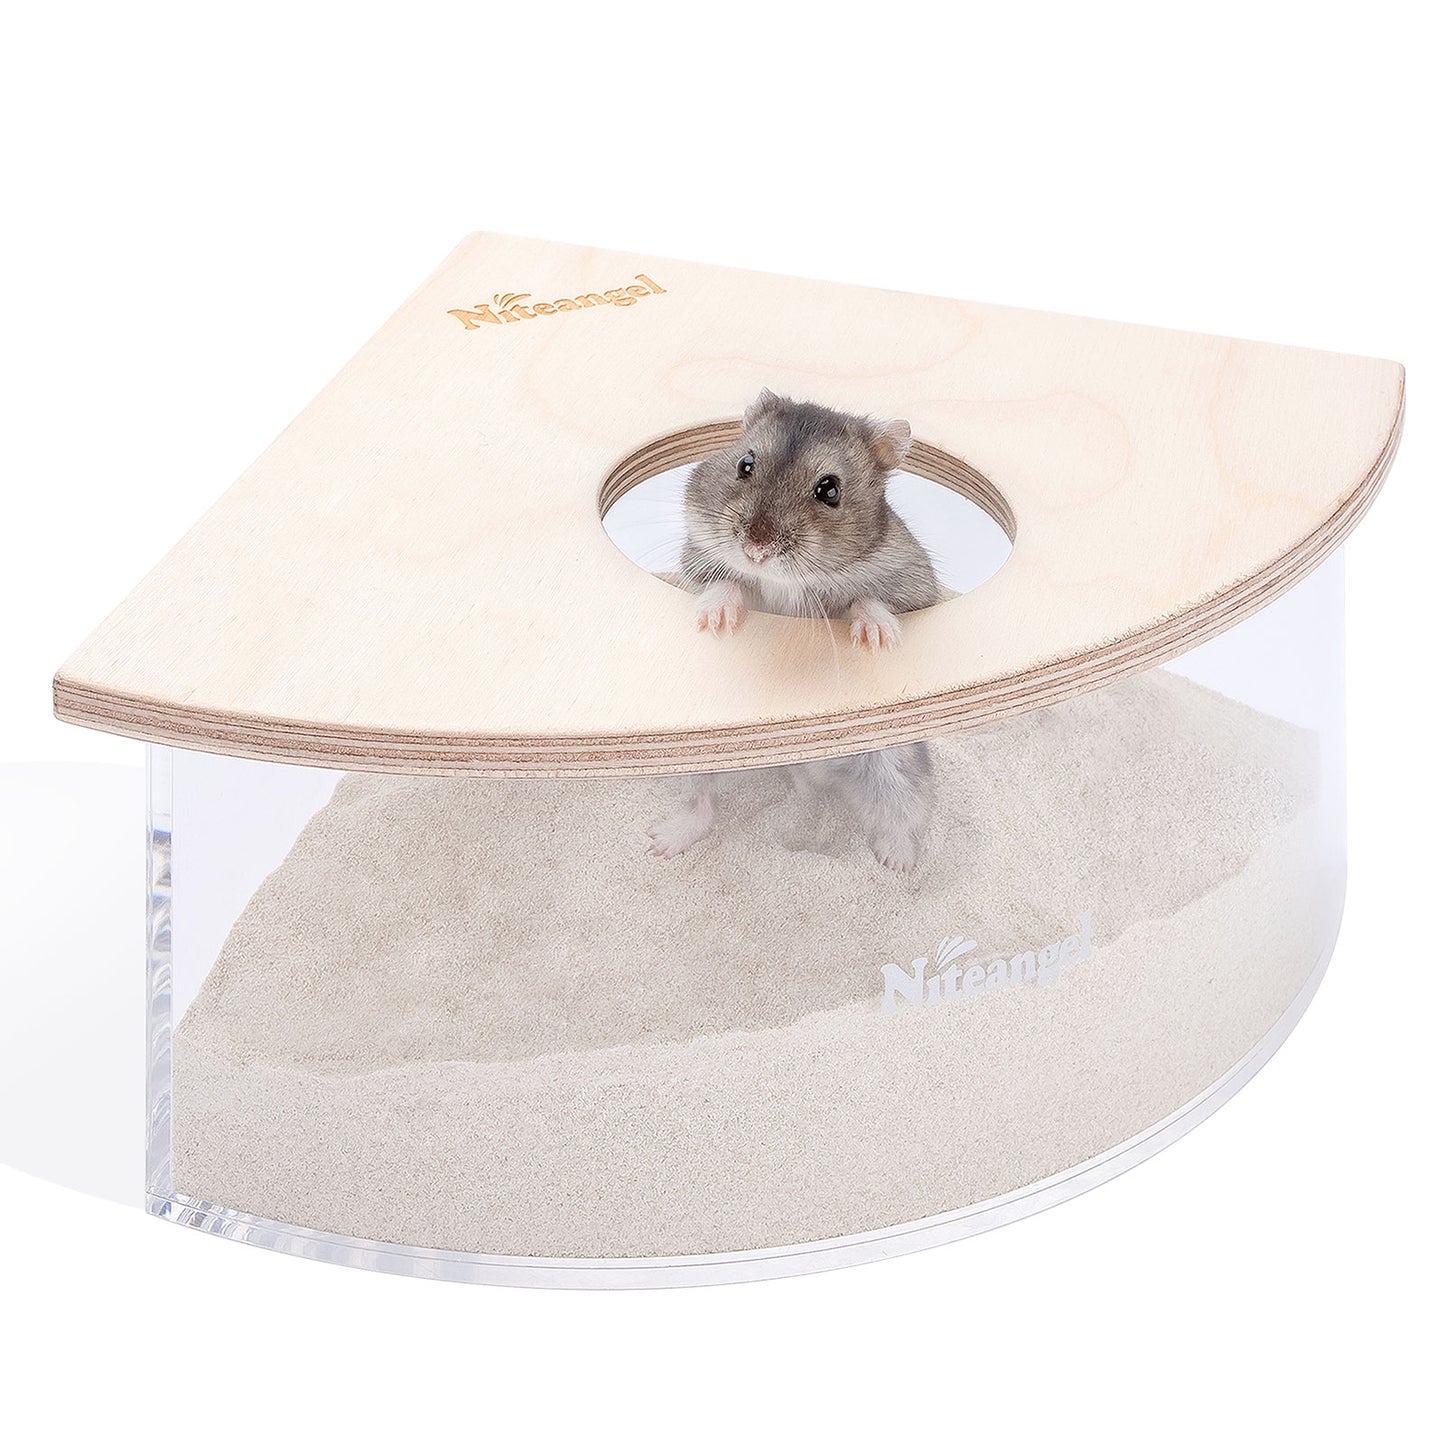 Niteangel Small Animal Sand-Bath Box - Acrylic Critter's Sand Bath Shower Room & Digging Sand Container〔Triangle〕